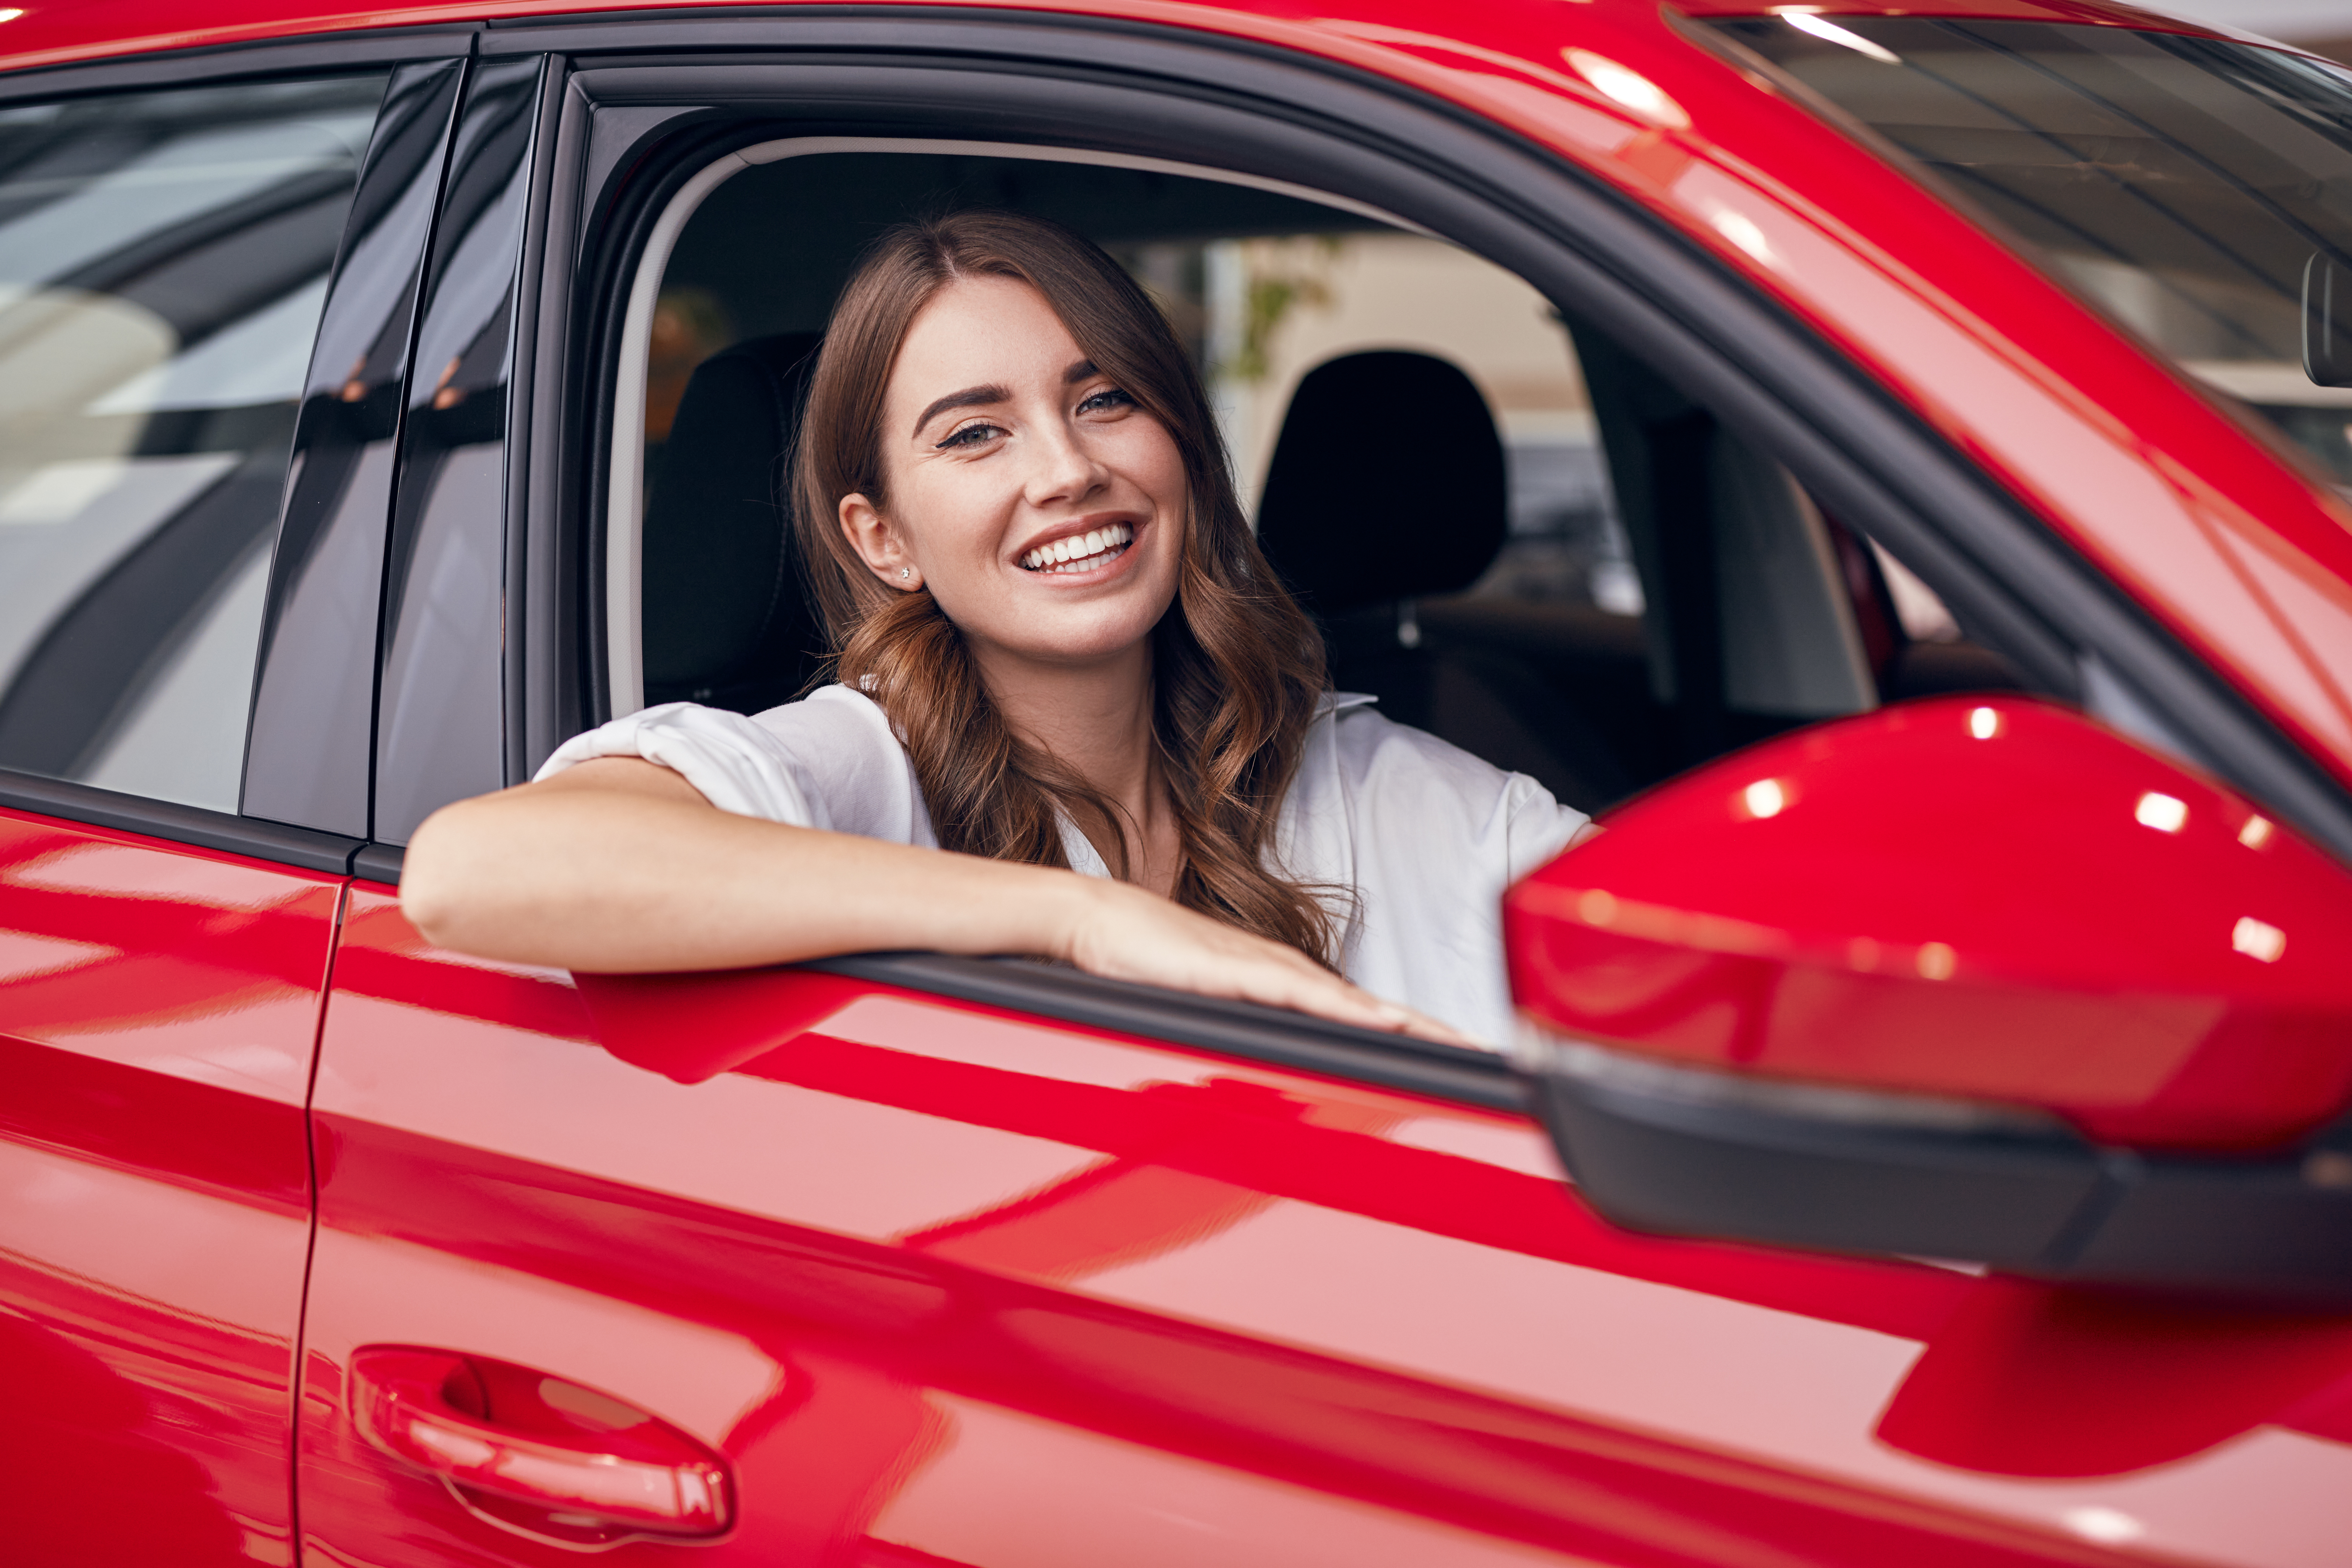 A woman smiling in a car | Source: Shutterstock